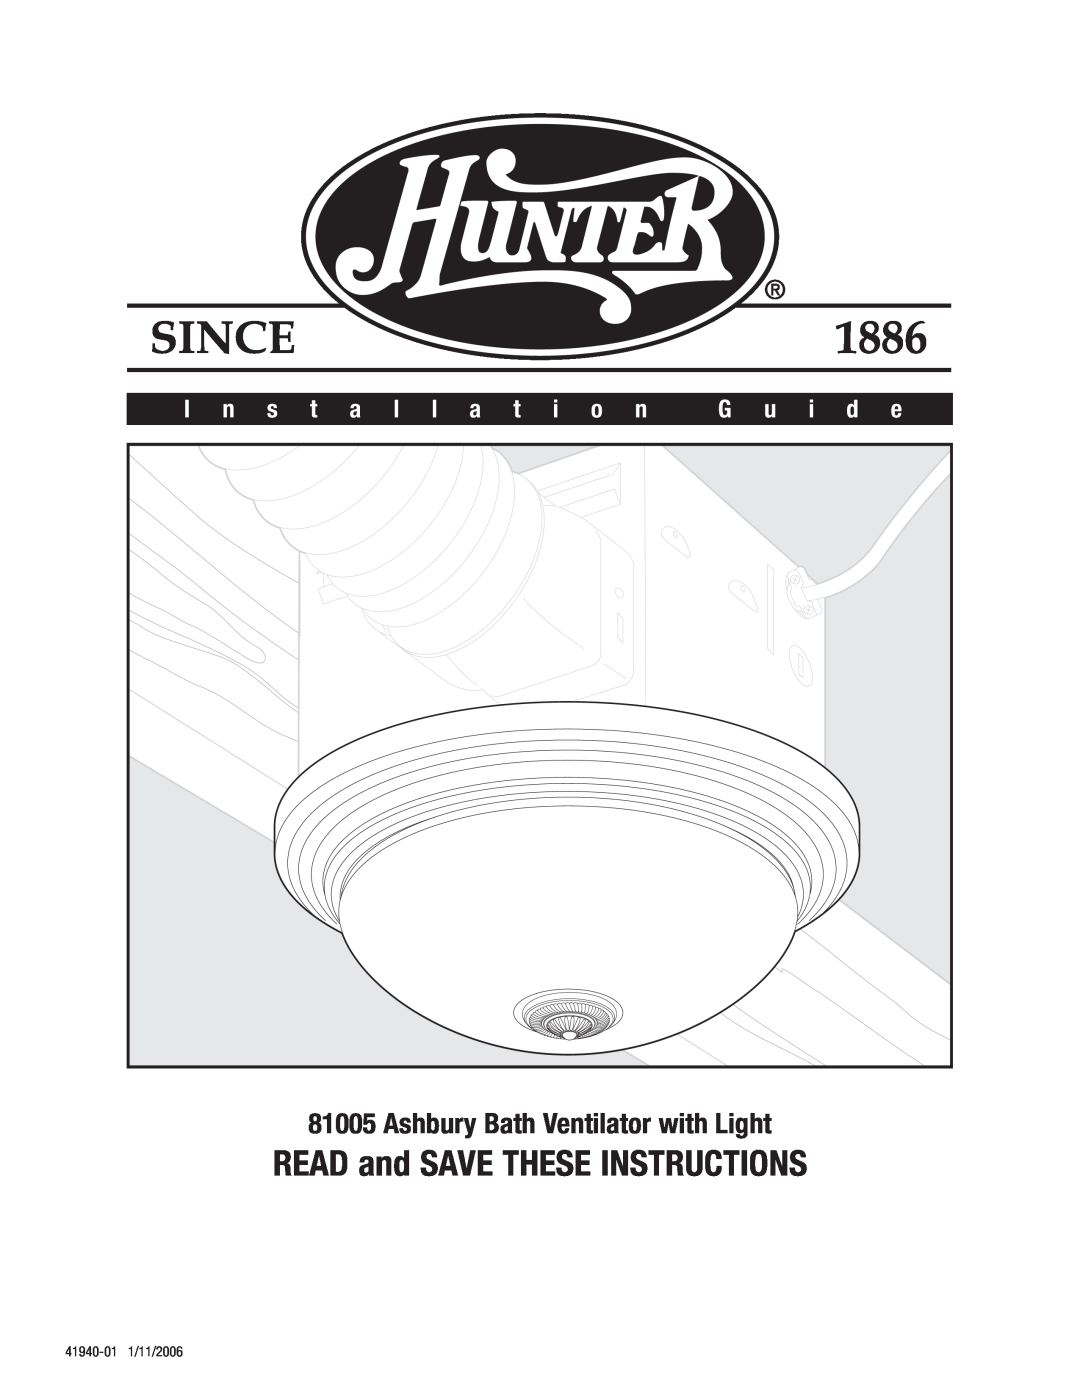 Hunter Fan 81005 manual READ and SAVE THESE INSTRUCTIONS, Ashbury Bath Ventilator with Light, I n s t a l l a t i o n 